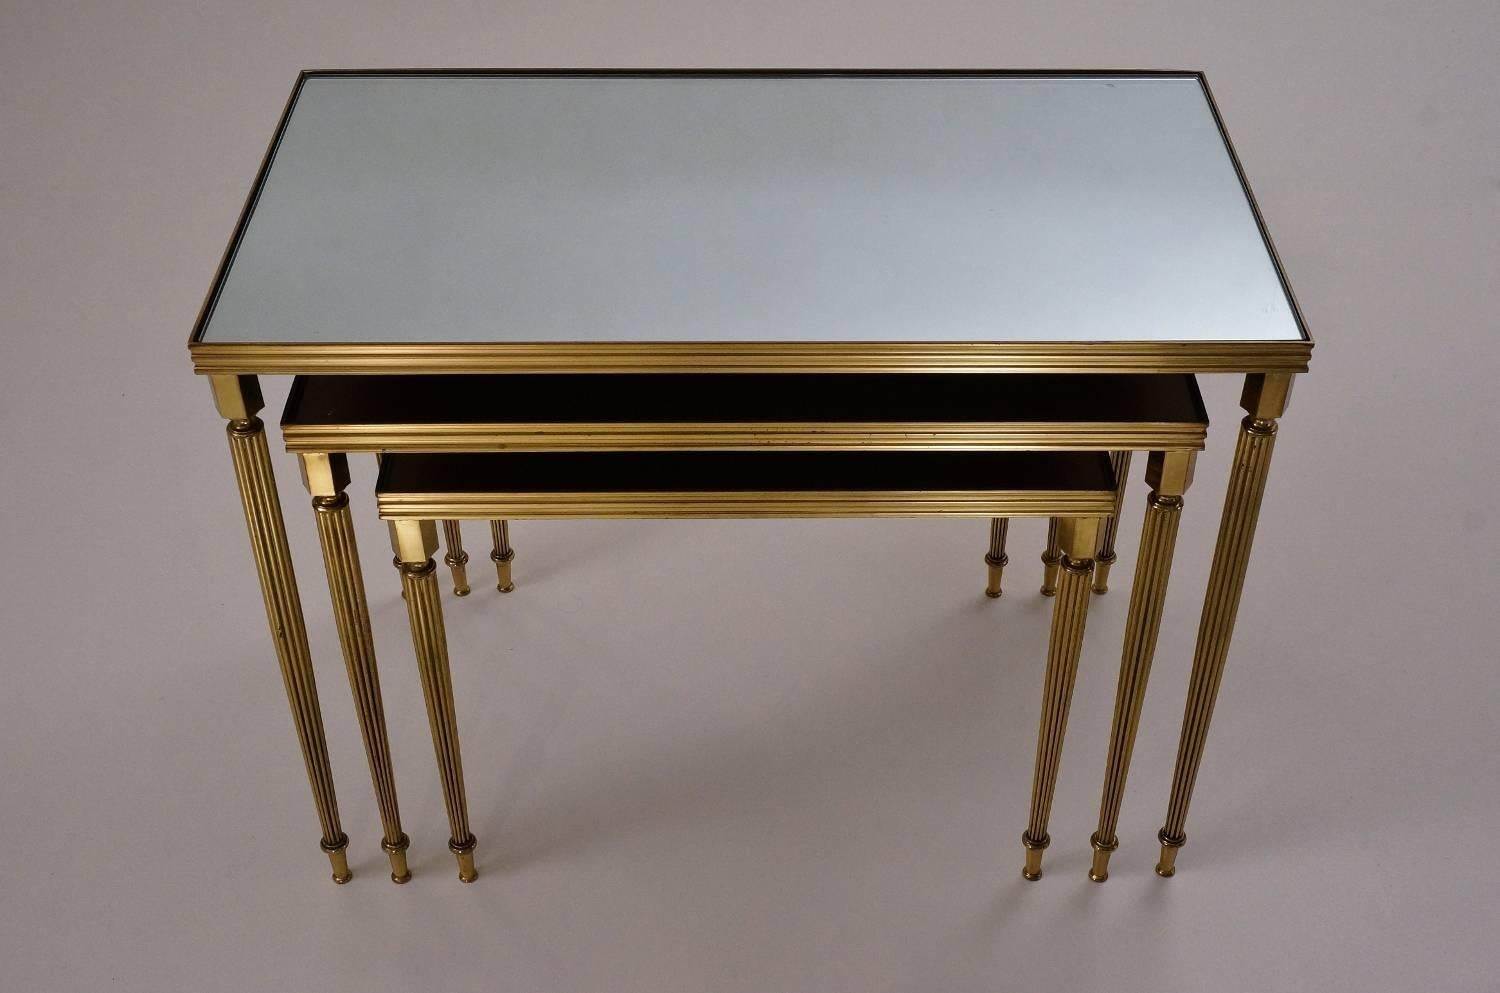 Maison Baguès Nesting Tables, Brass and Mirror, 1969, French 2